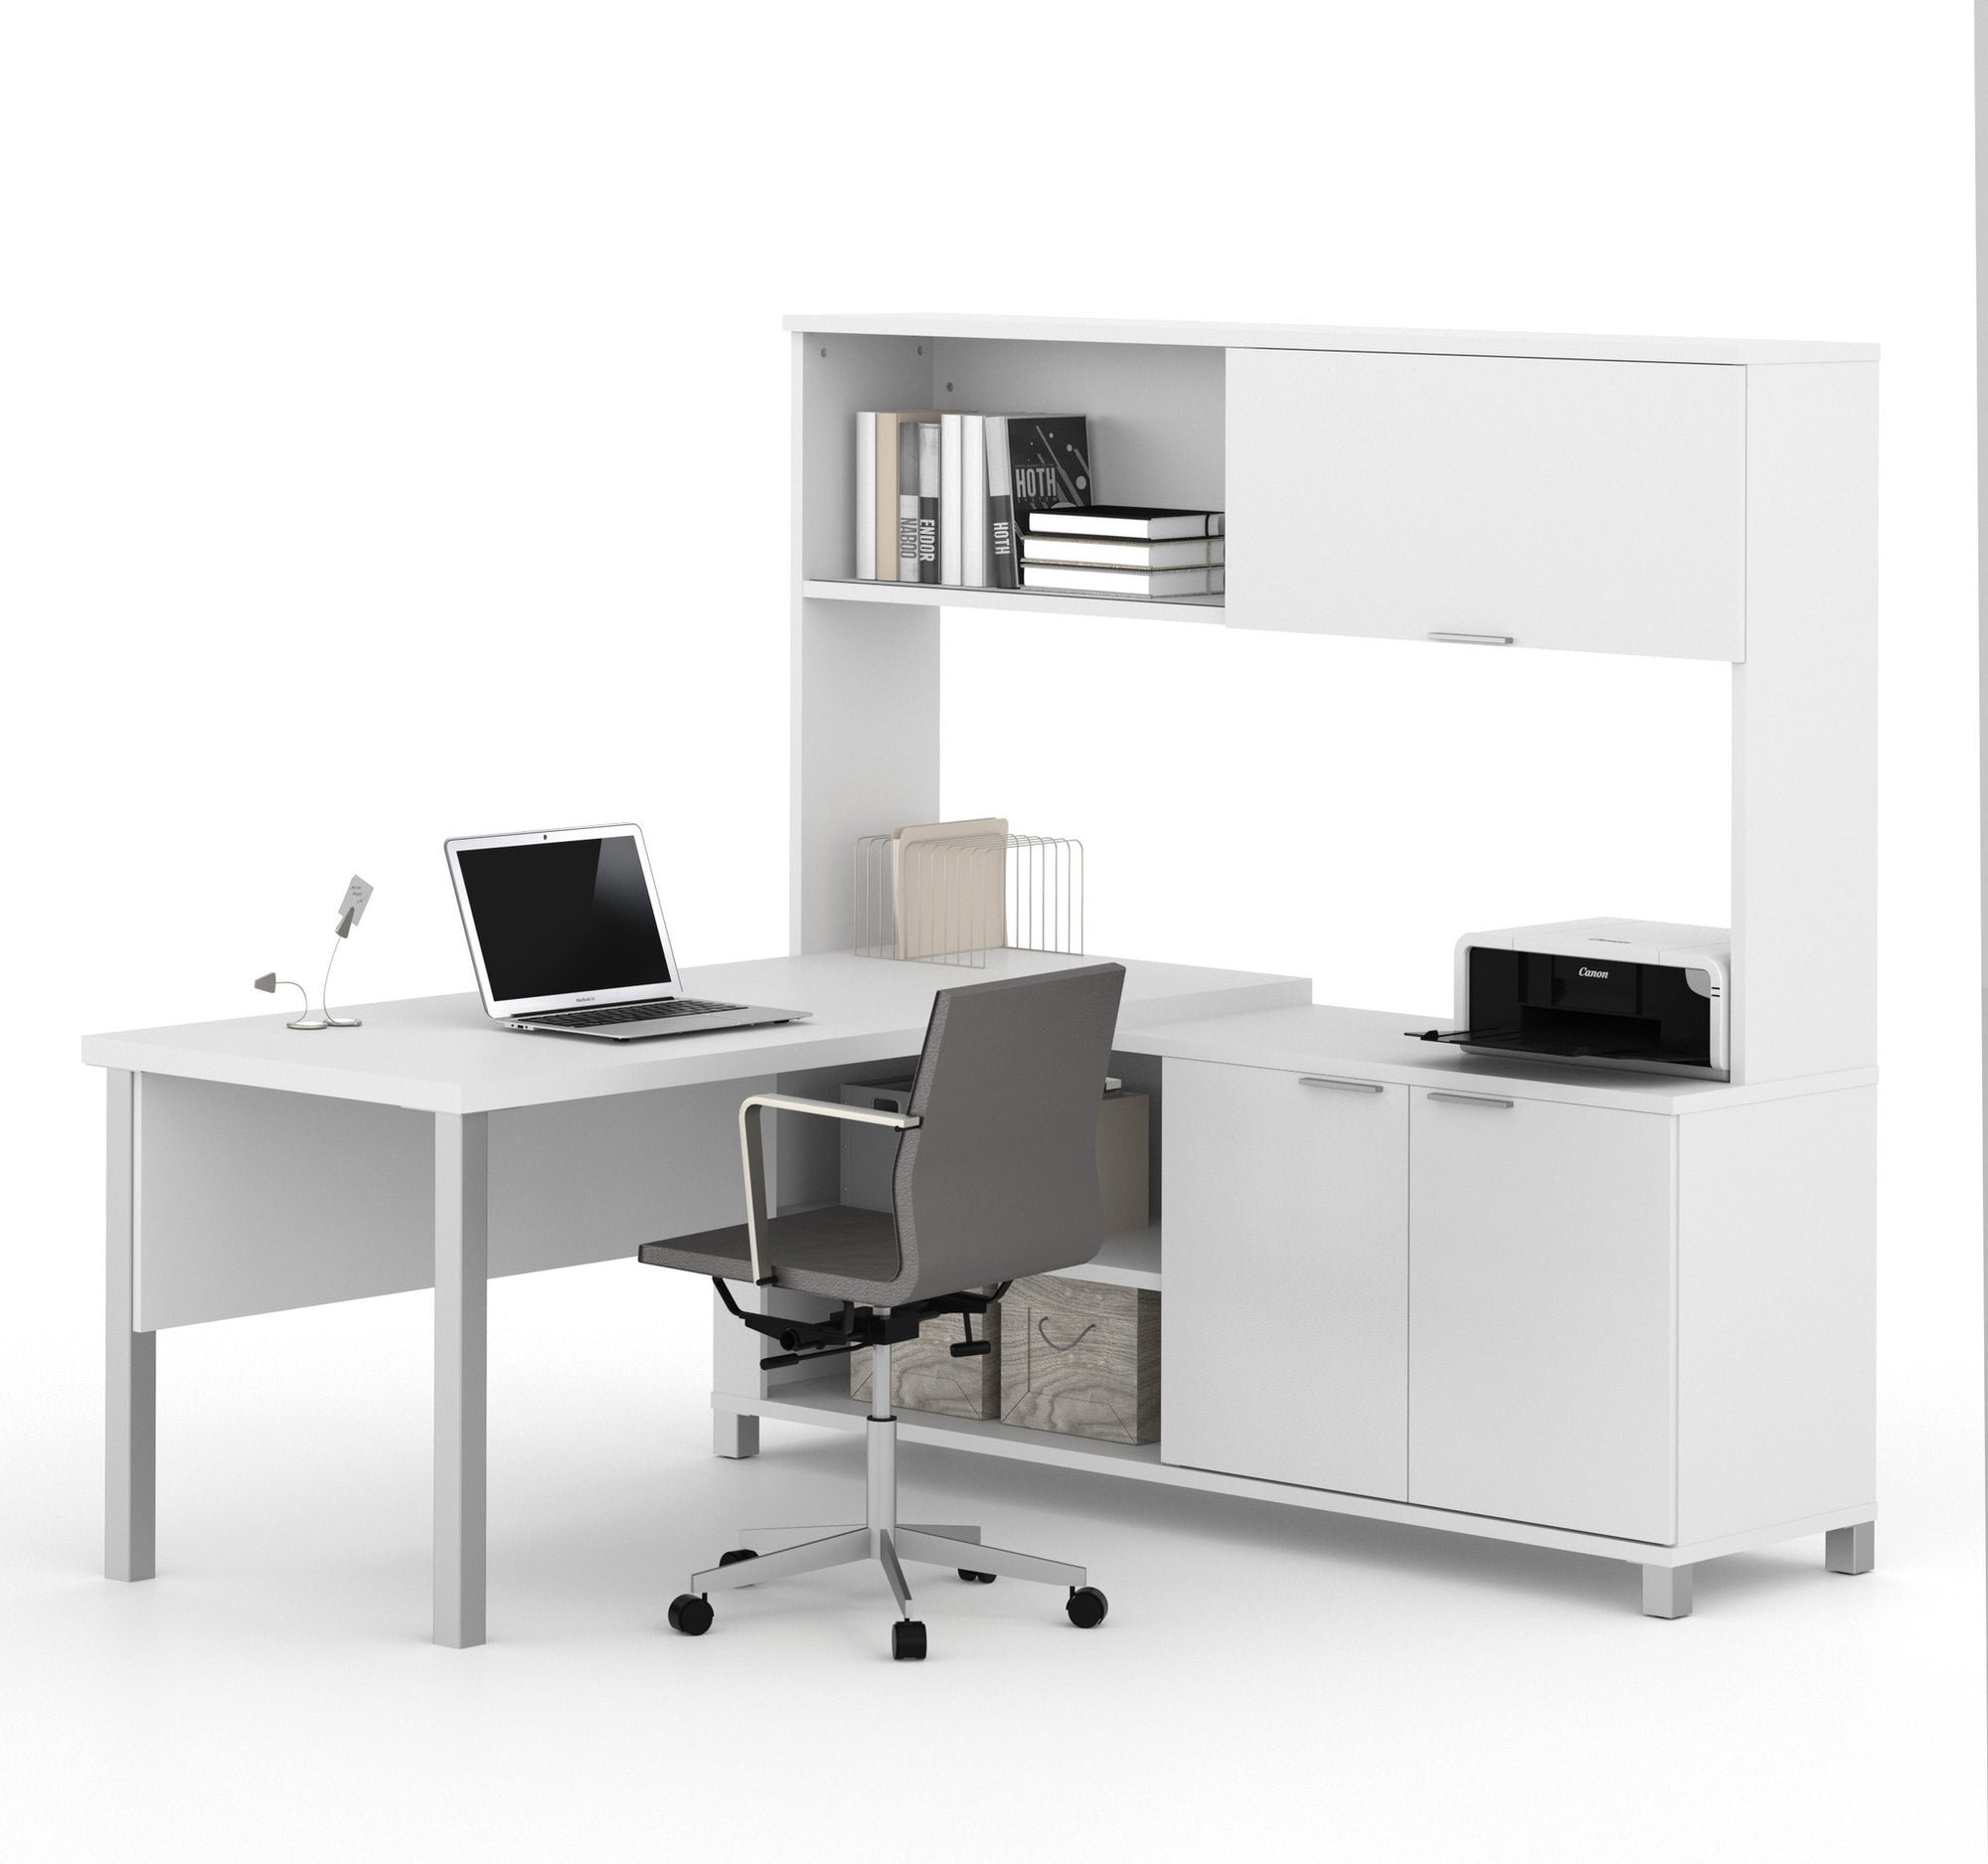 71 X 71 White Modern L Shaped Desk With Hutch By Bestar